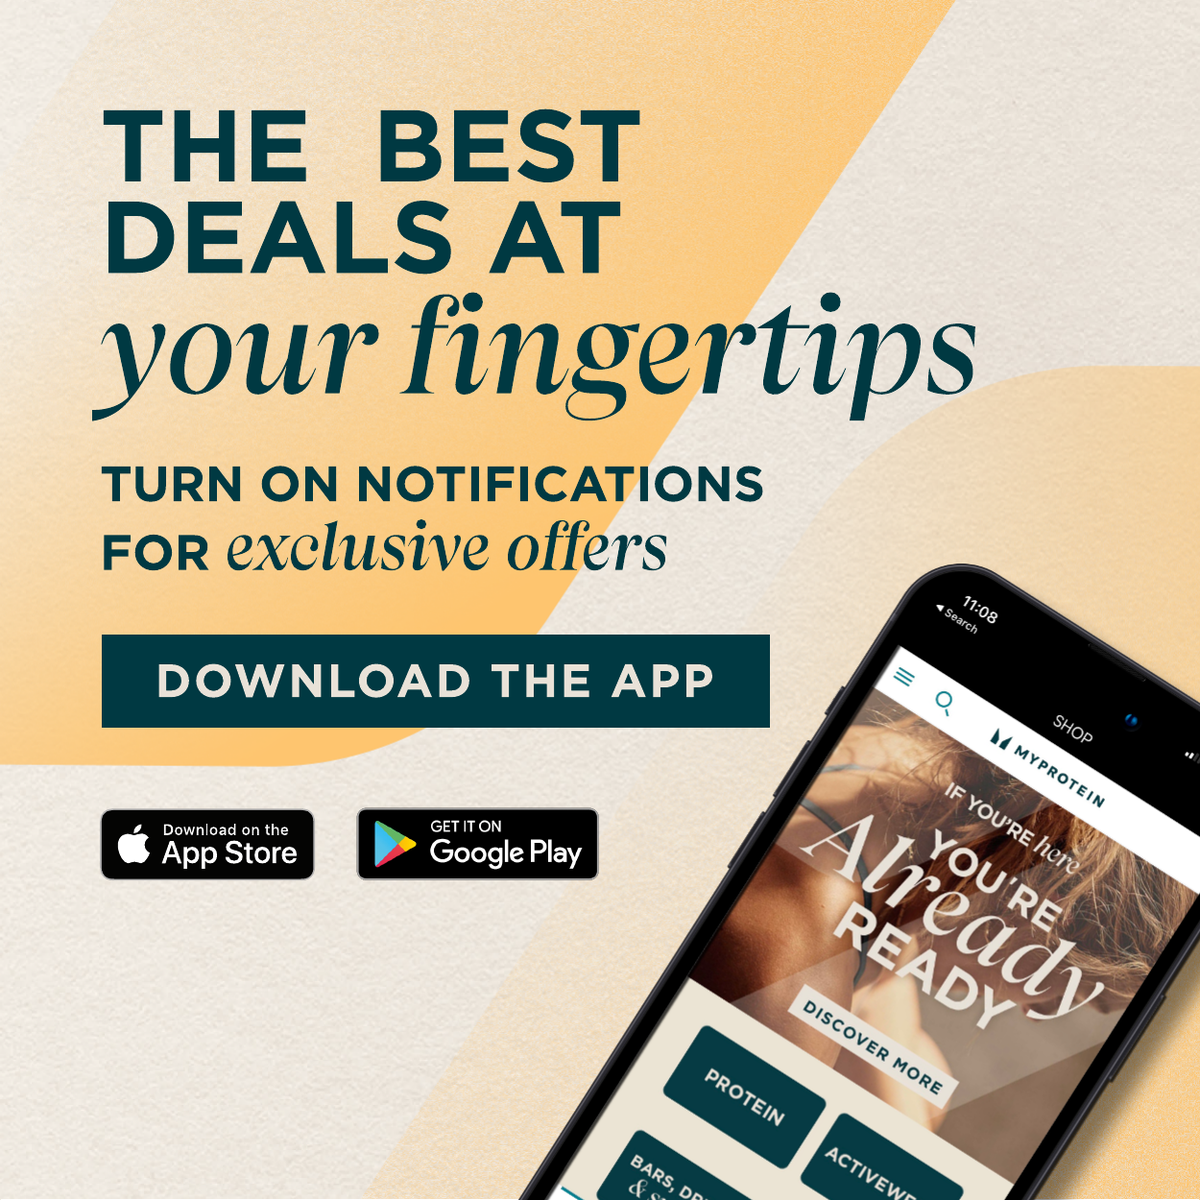 The best deals at your fingertips 'Turn on notifications for exclusive offers 'Download the app'